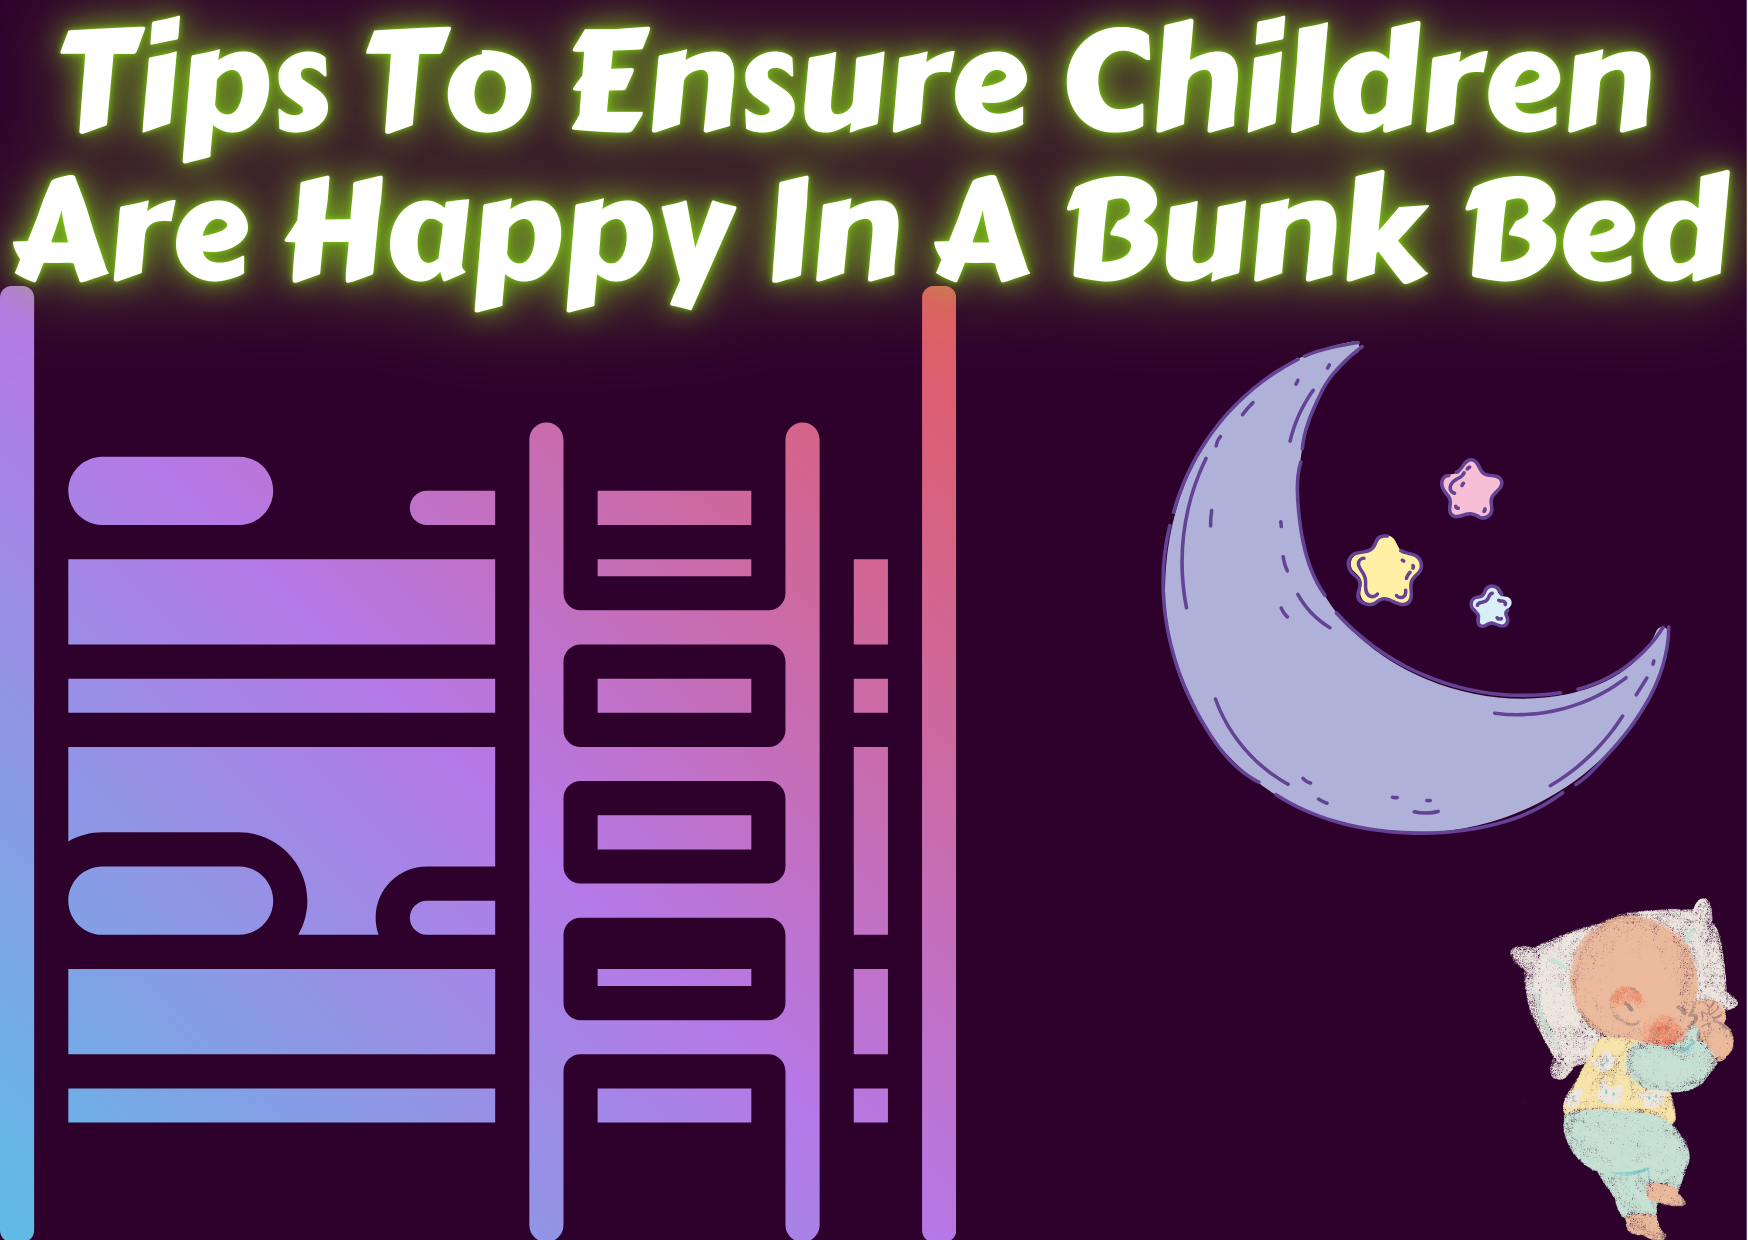 Tips To Ensure Children Are Happy In A Bunk Bed